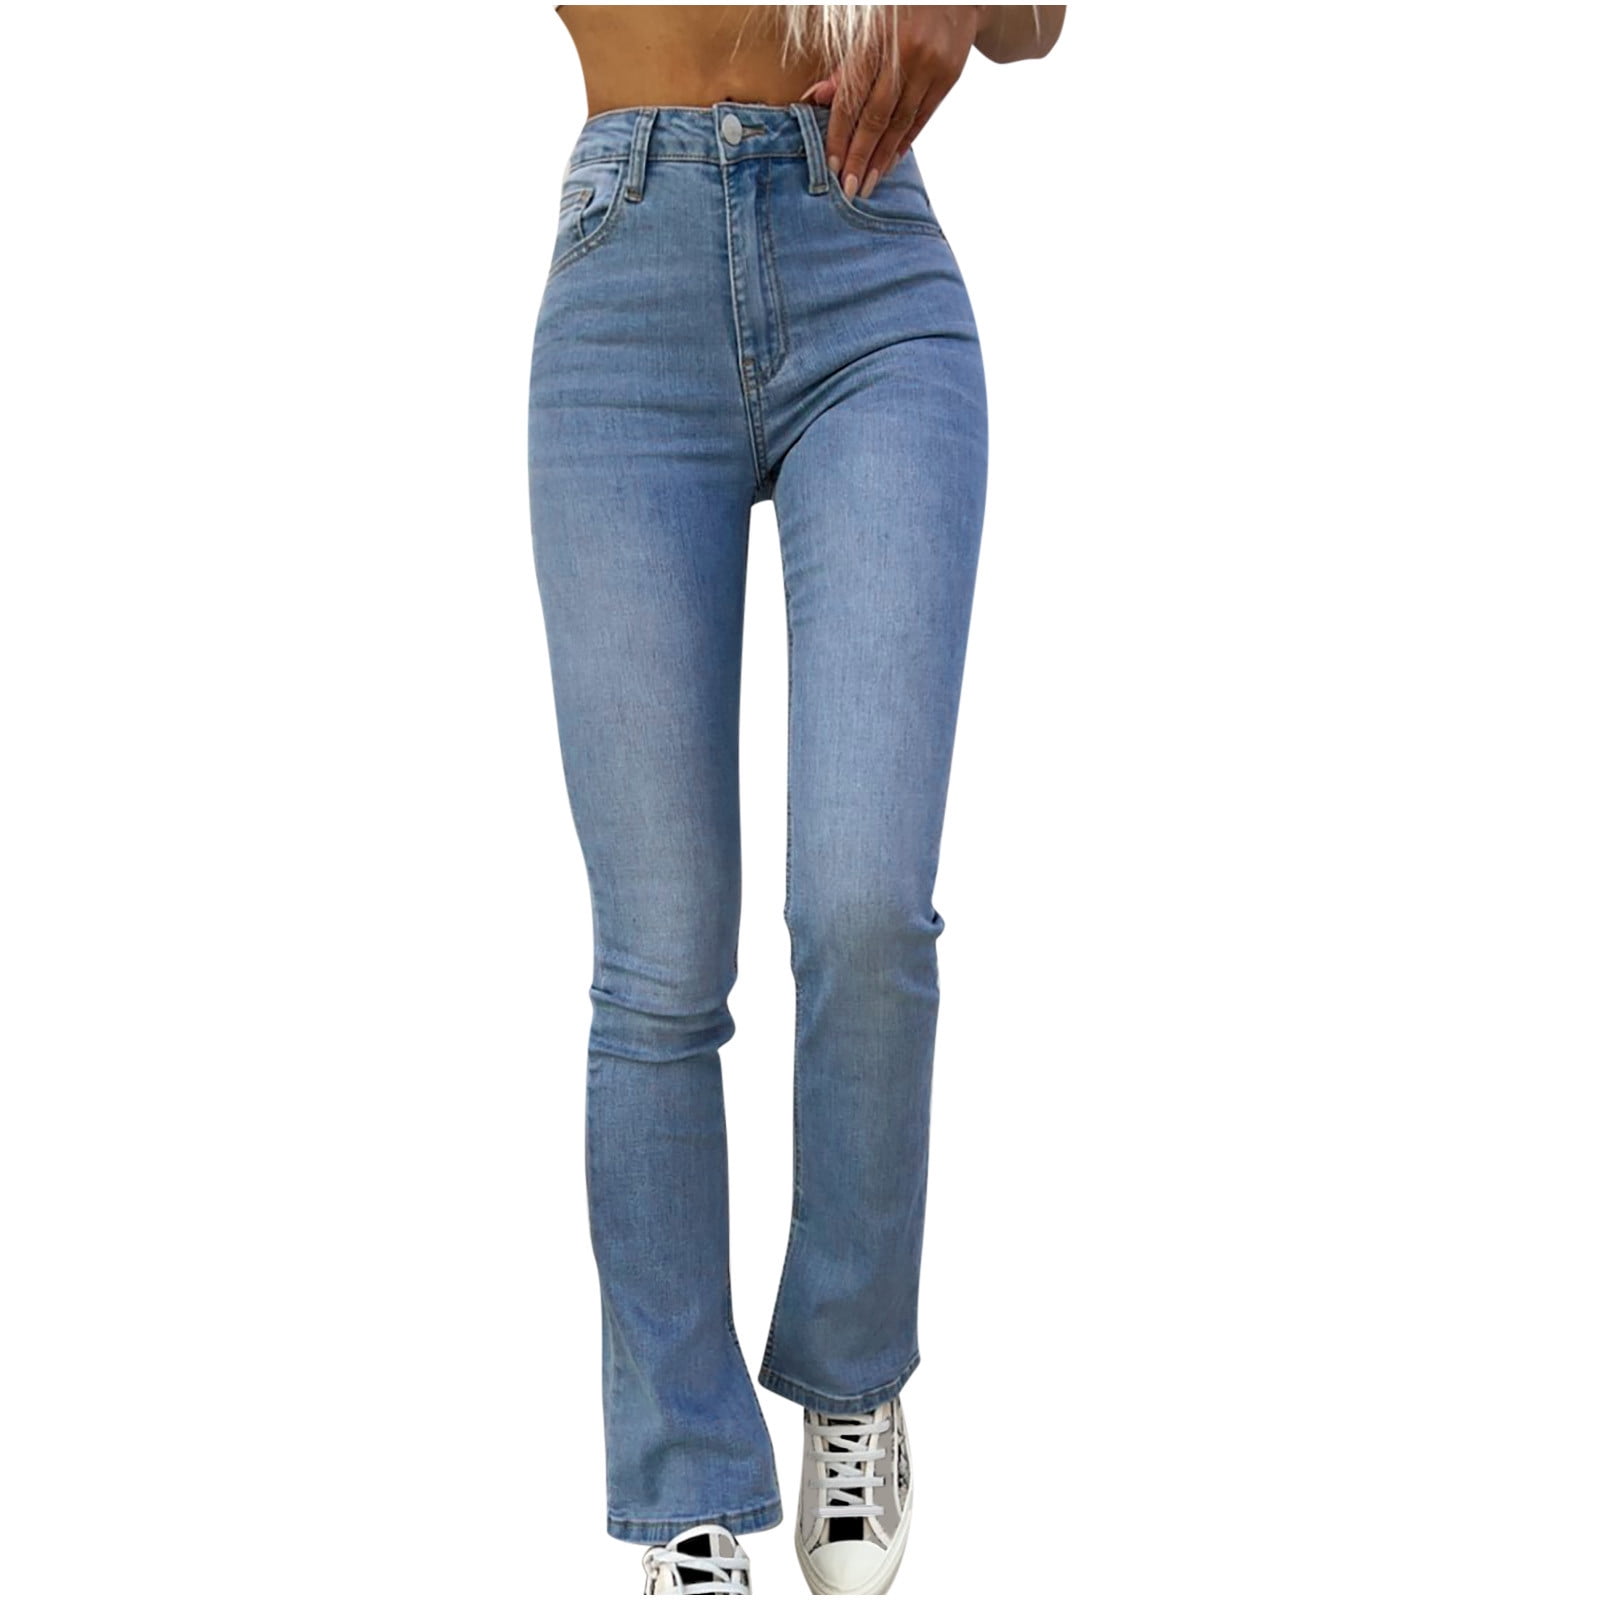 SamMoSon Pant Stretchers for Jeans Jeans Blouse for Women Ripped